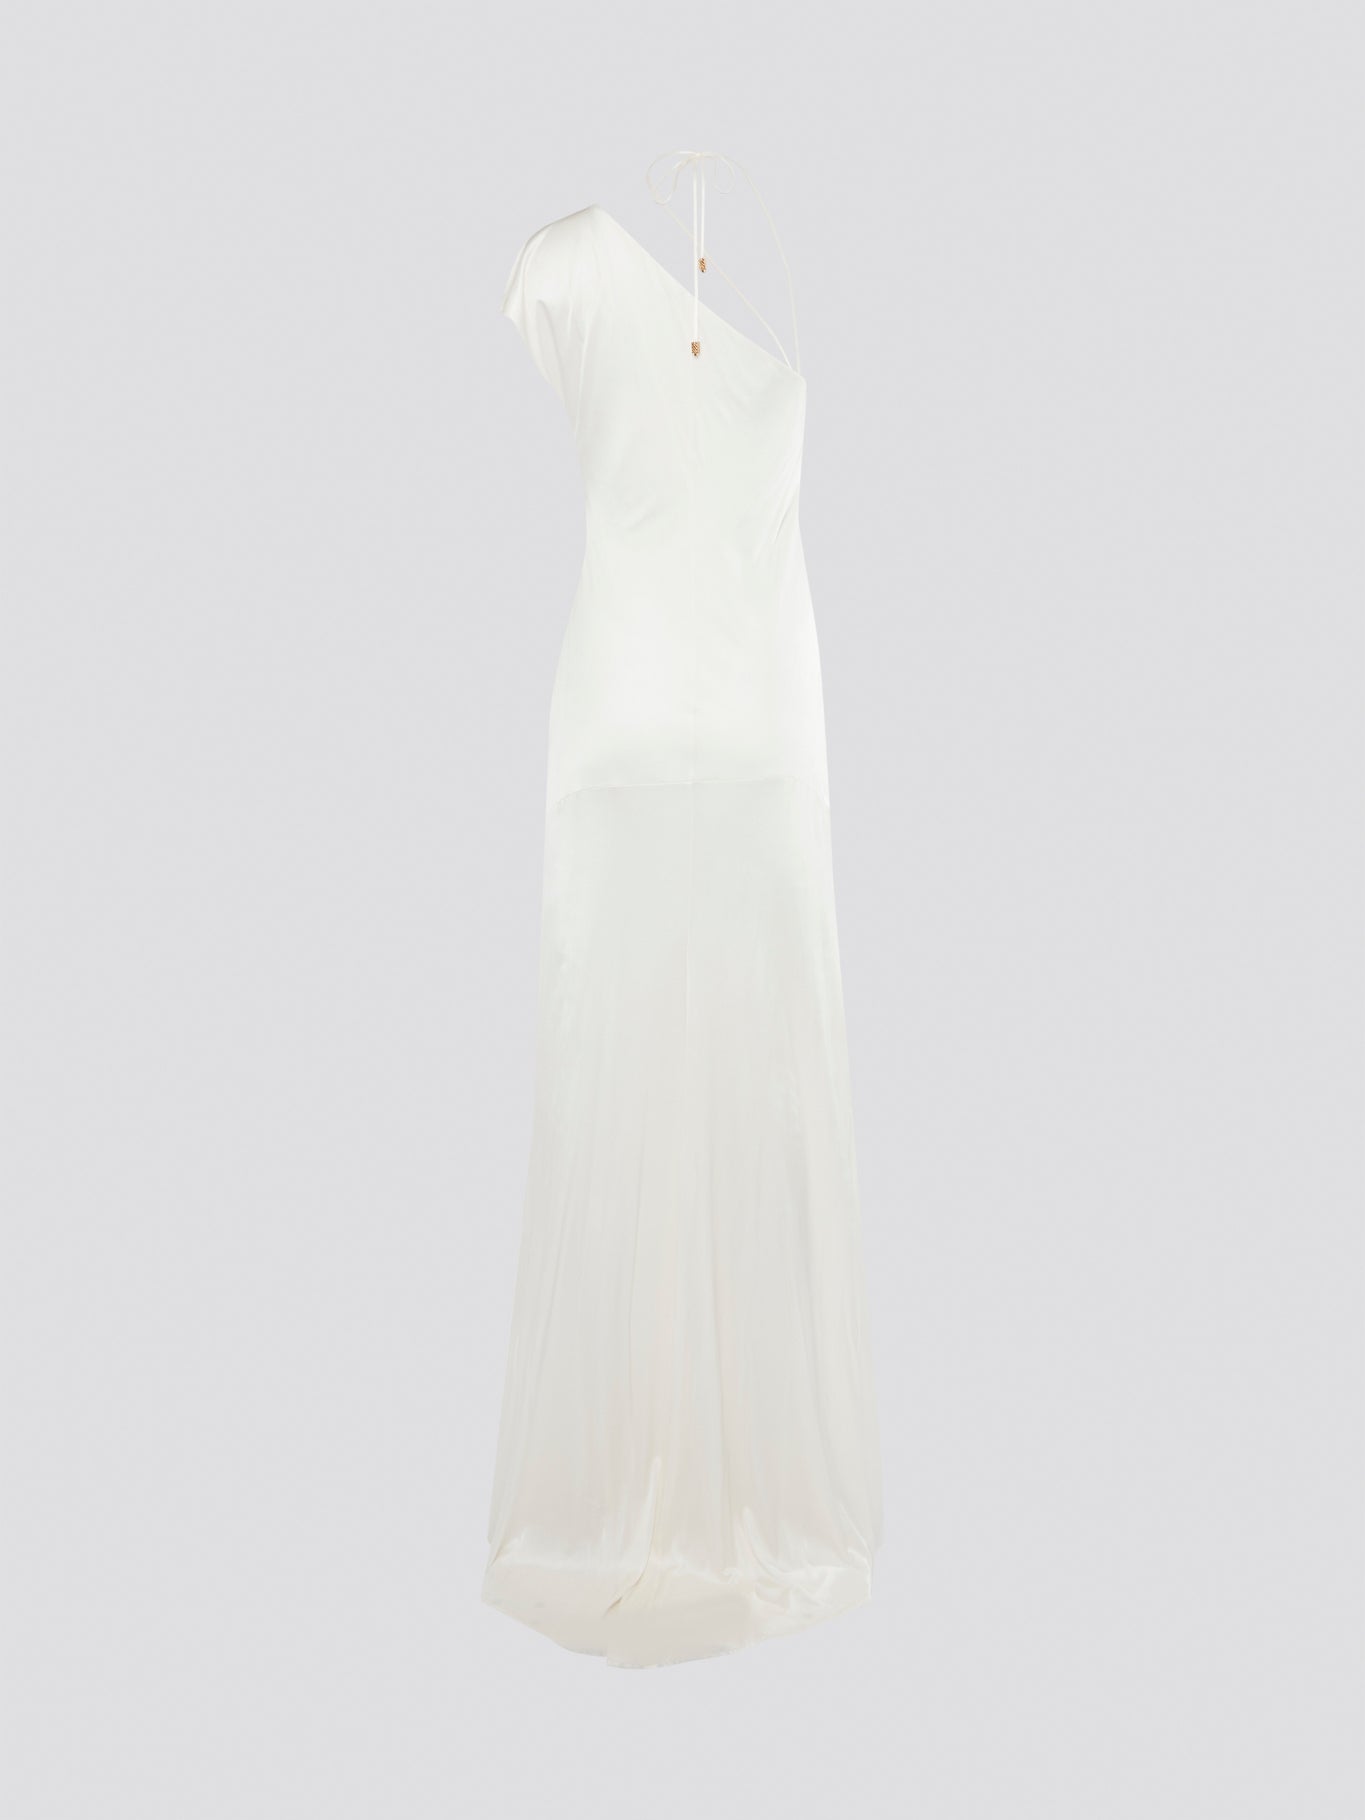 Steal the spotlight in this stunning White Asymmetrical Gown by Roberto Cavalli, perfect for your next glamorous event. With its unique asymmetrical design and flowing silhouette, this gown is sure to turn heads and make you feel like a true fashion icon. Embrace your inner goddess and make a statement in this unforgettable piece that exudes elegance and sophistication.